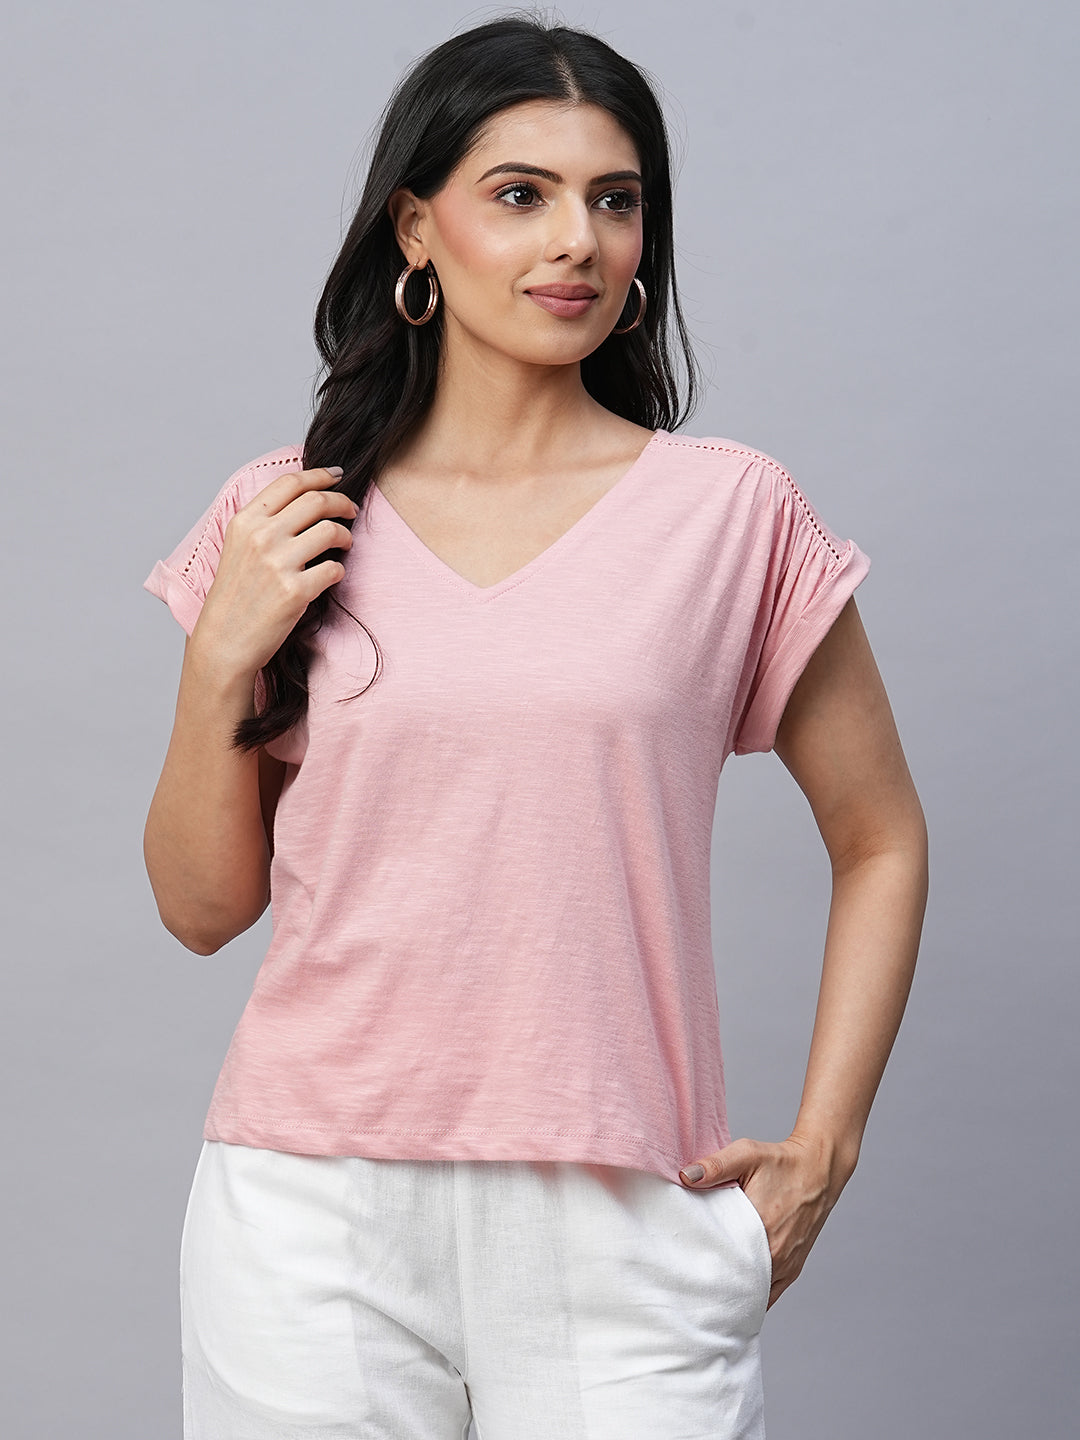 Women's Cotton Pink Loose Fit Tshirt